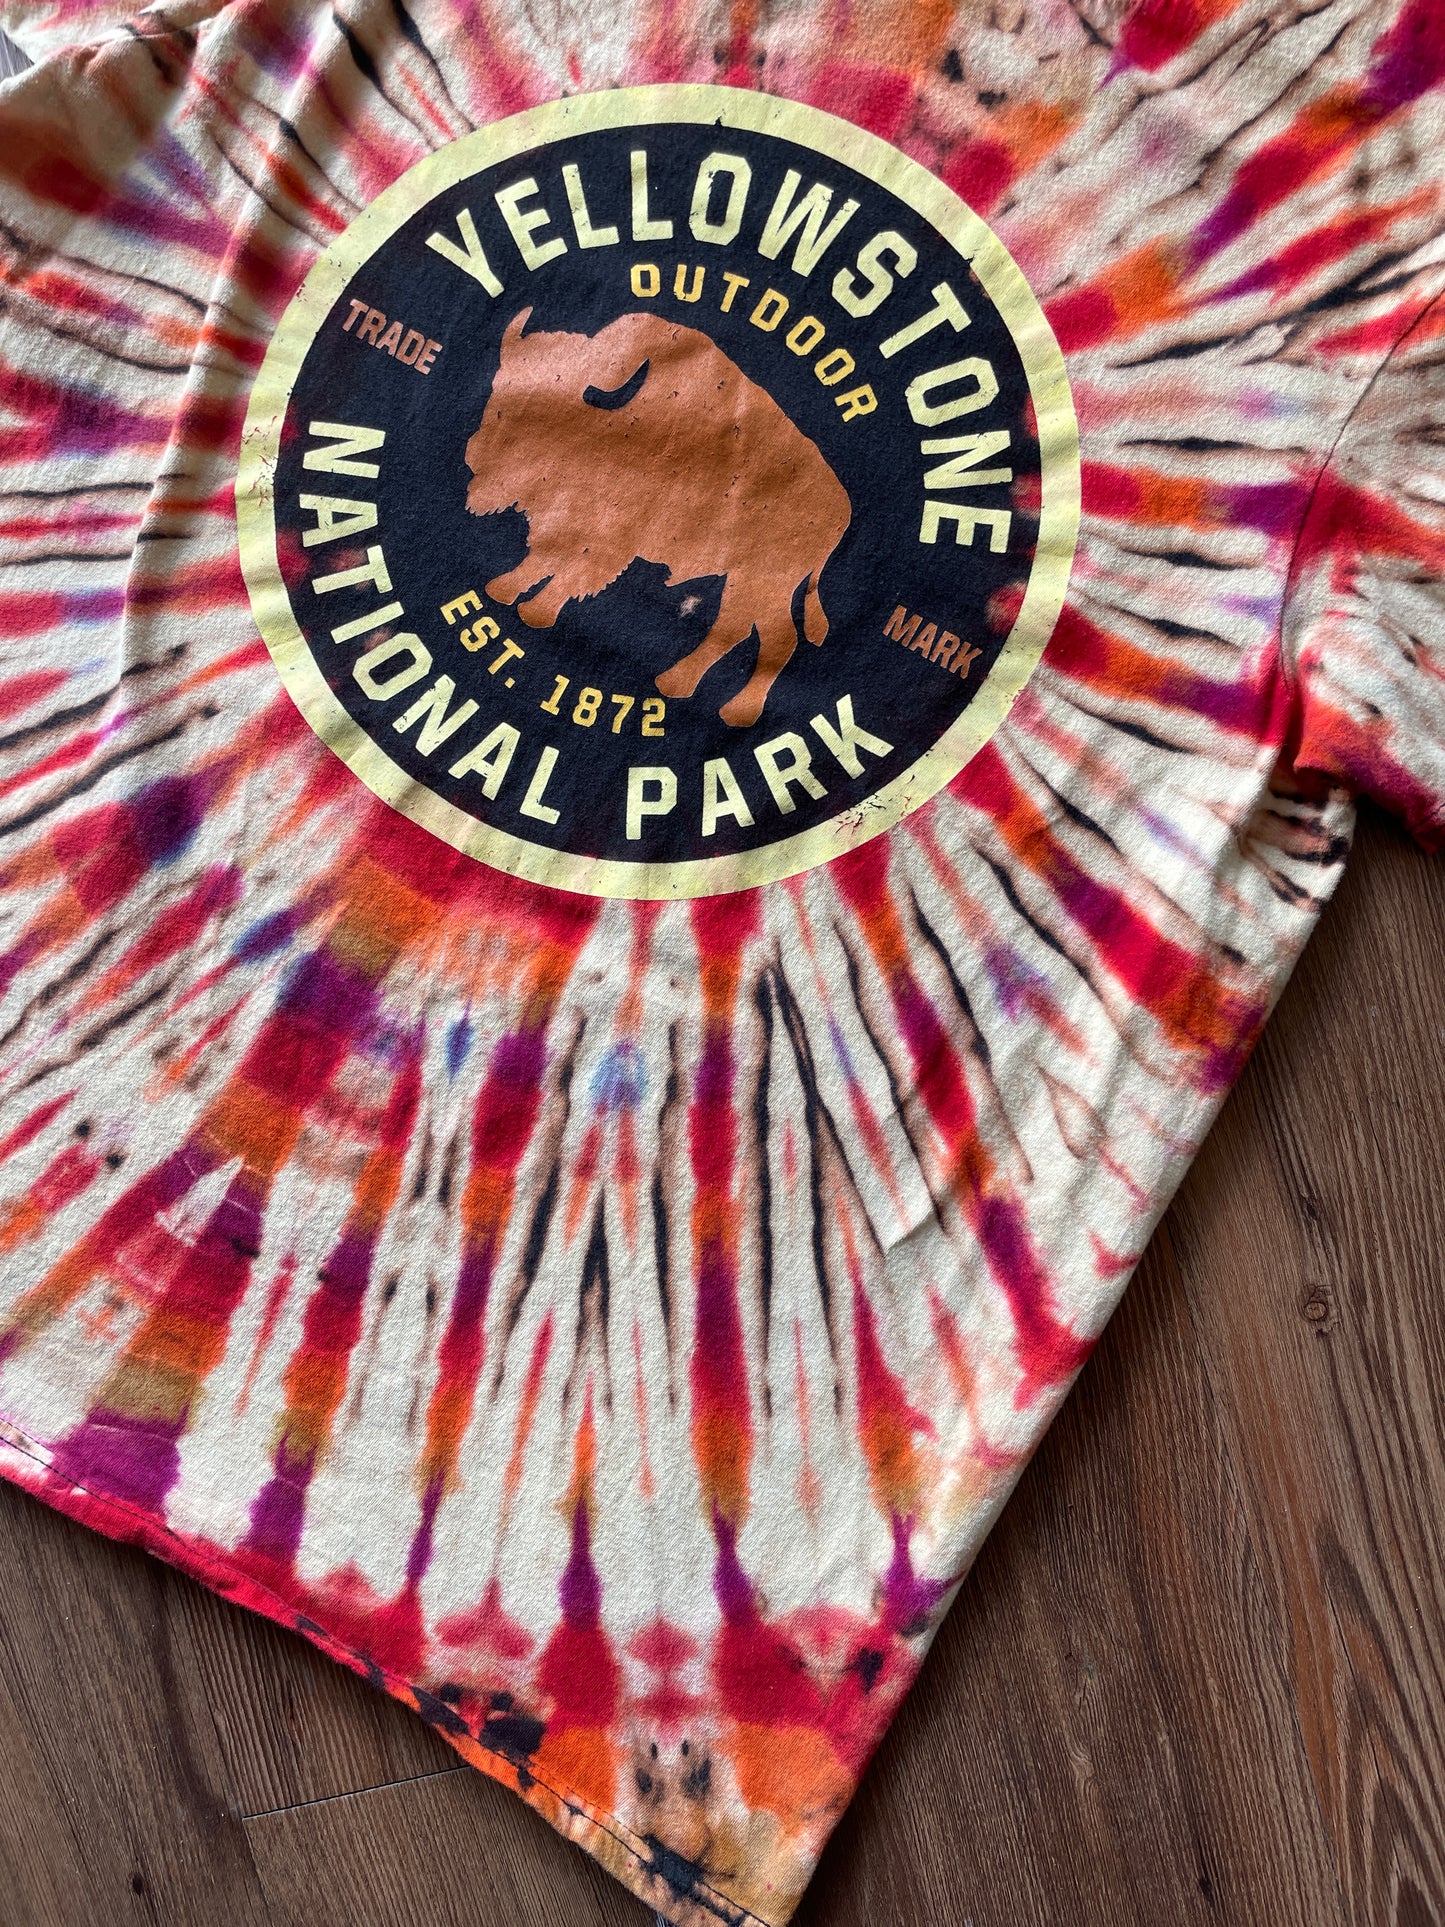 LARGE Men’s Yellowstone National Park Handmade Reverse Tie Dye T-Shirt | One-Of-a-Kind Black and Orange Short Sleeve